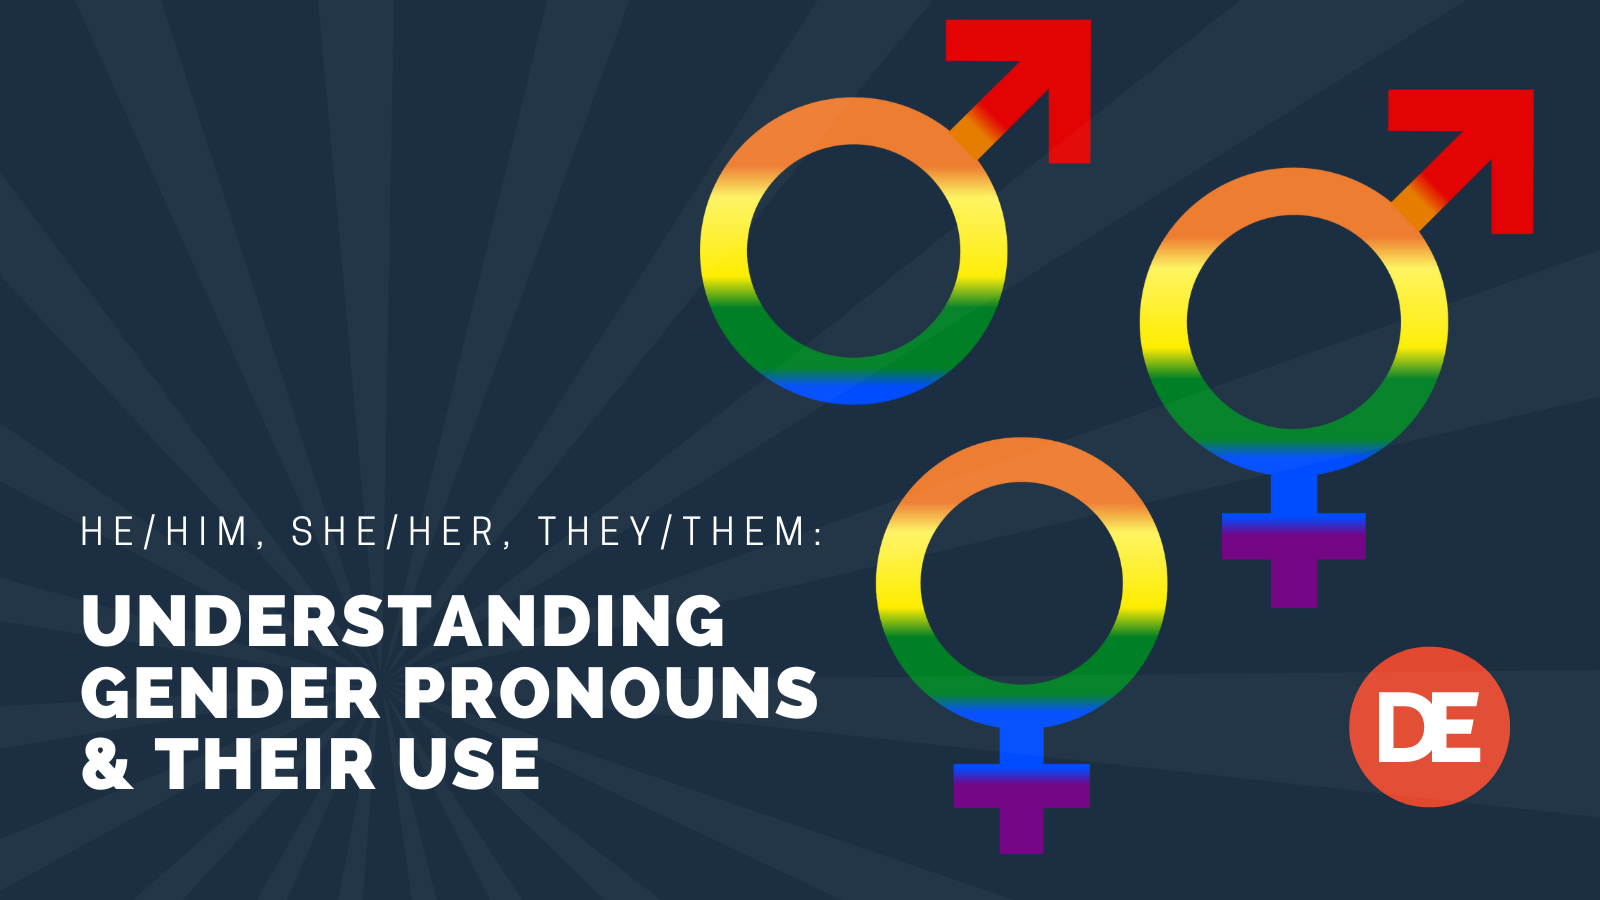 he-him-she-her-they-them-understanding-gender-pronouns-their-use